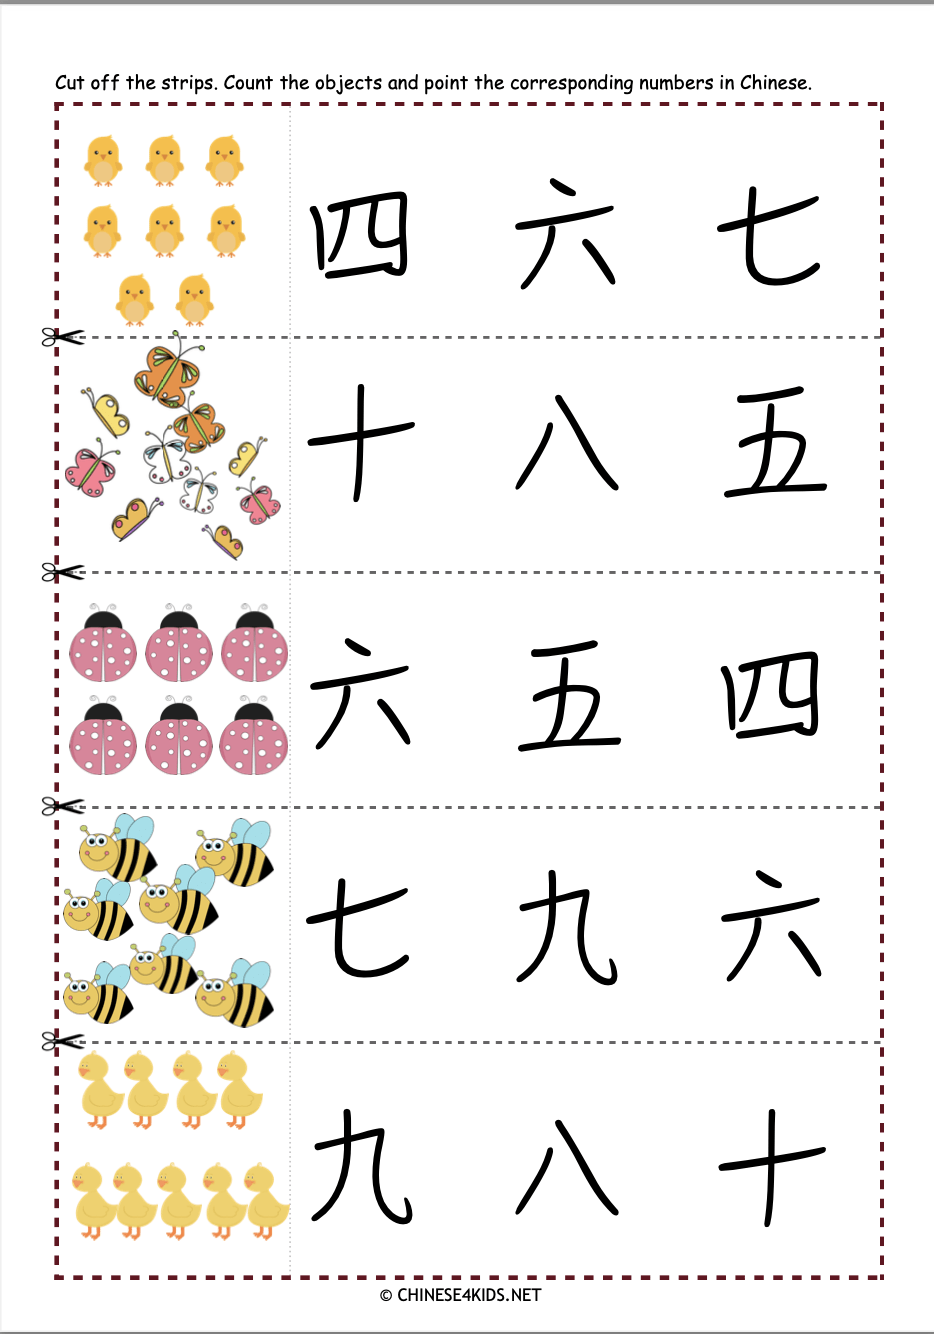 numbers-1-10-in-chinese-practice-workbook-for-kids